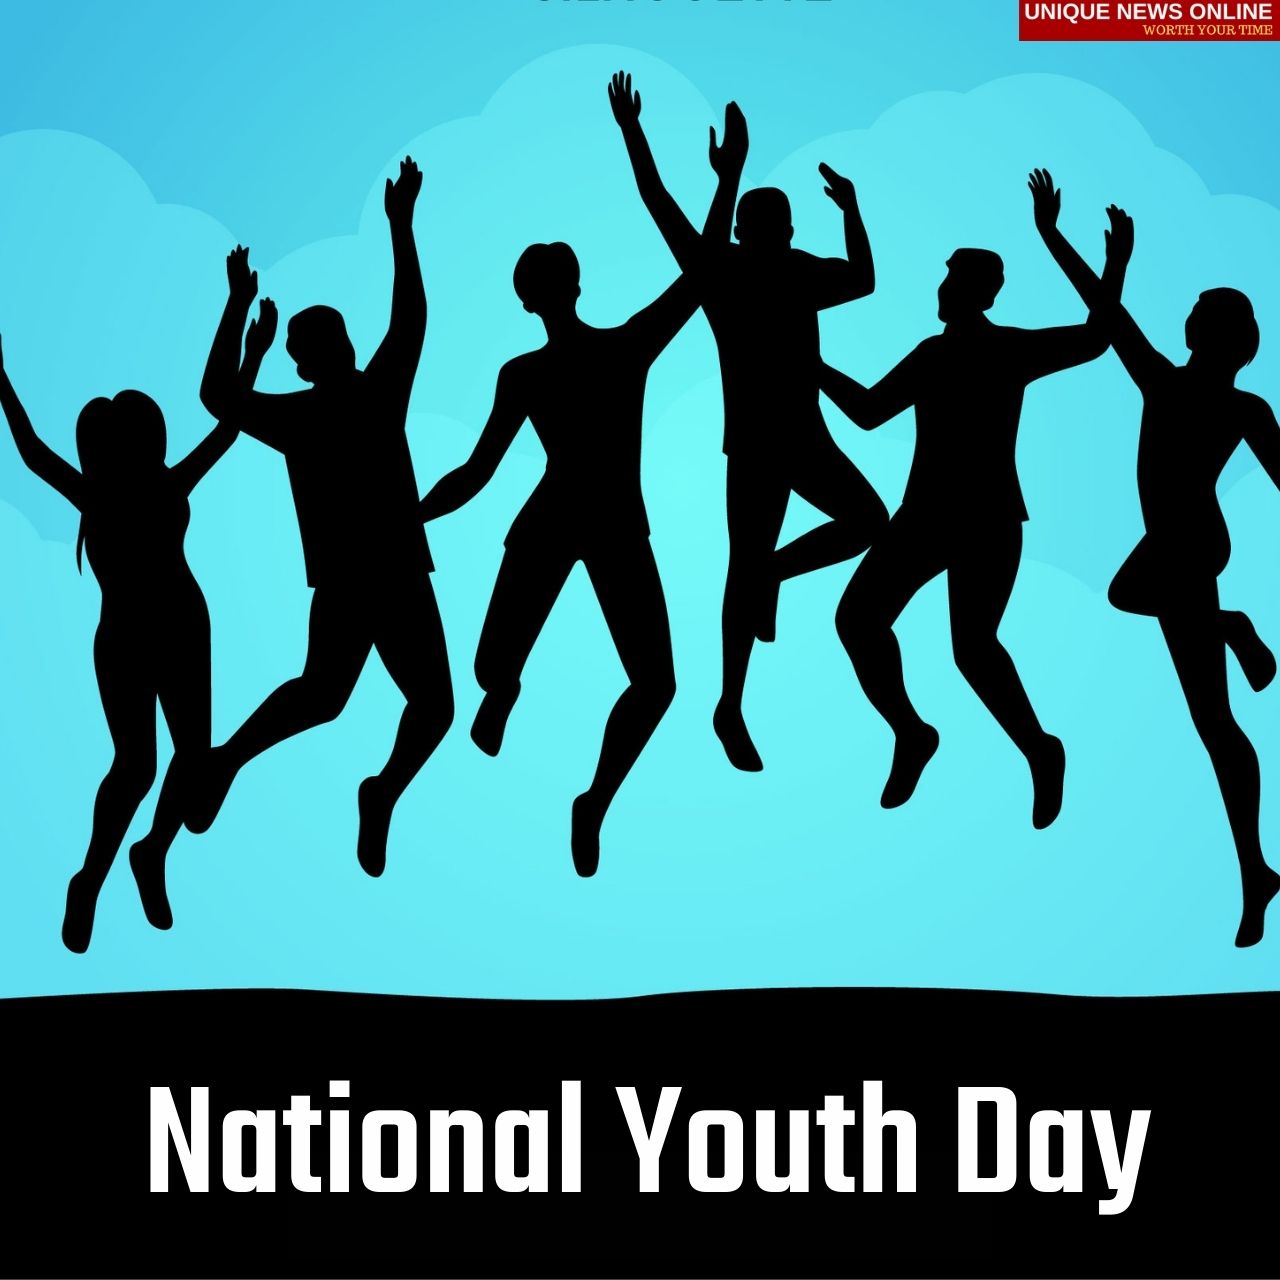 National Youth Day 2022 Posters, Banners, Sayings, Drawings, HD Wallpaper, WhatsApp DP to download